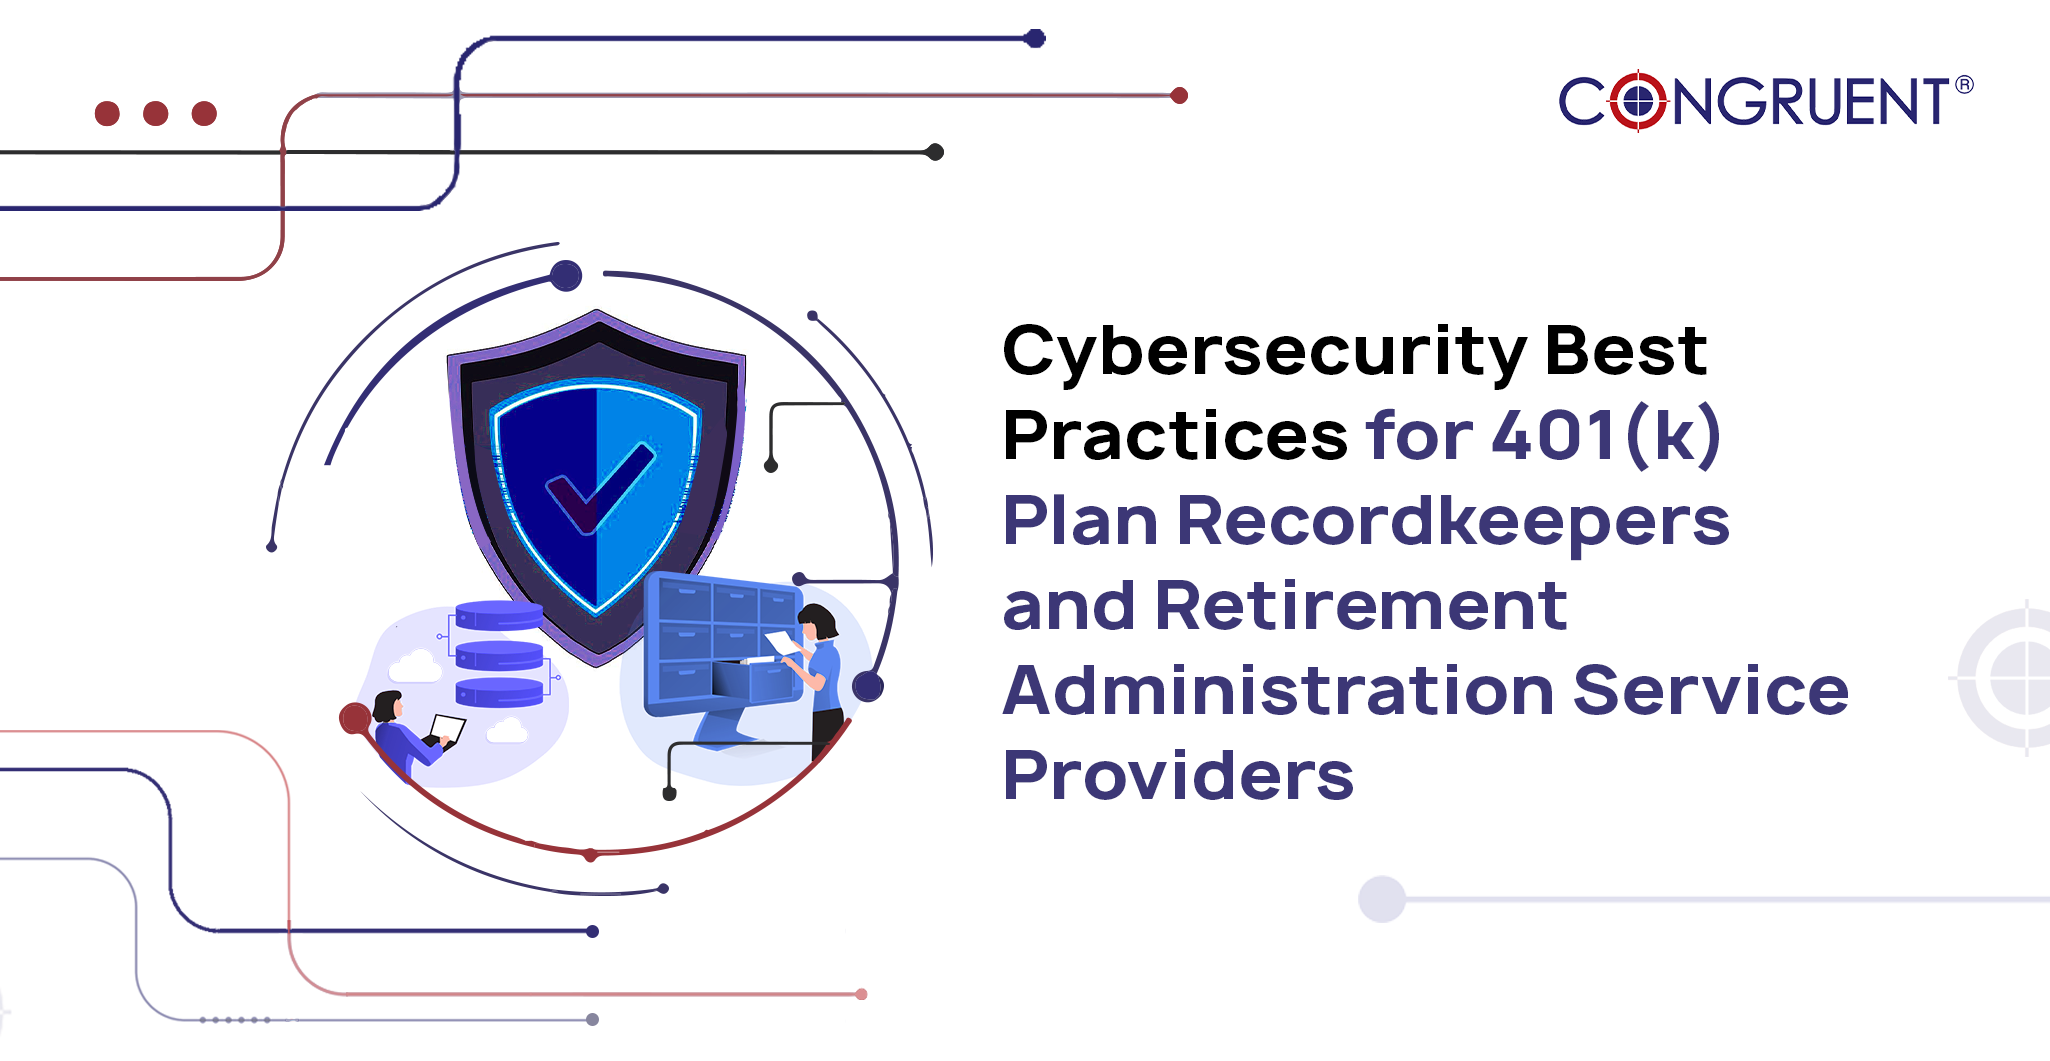 Cybersecurity Best Practices for 401(k) Plan Recordkeepers and Retirement Administration Service Providers